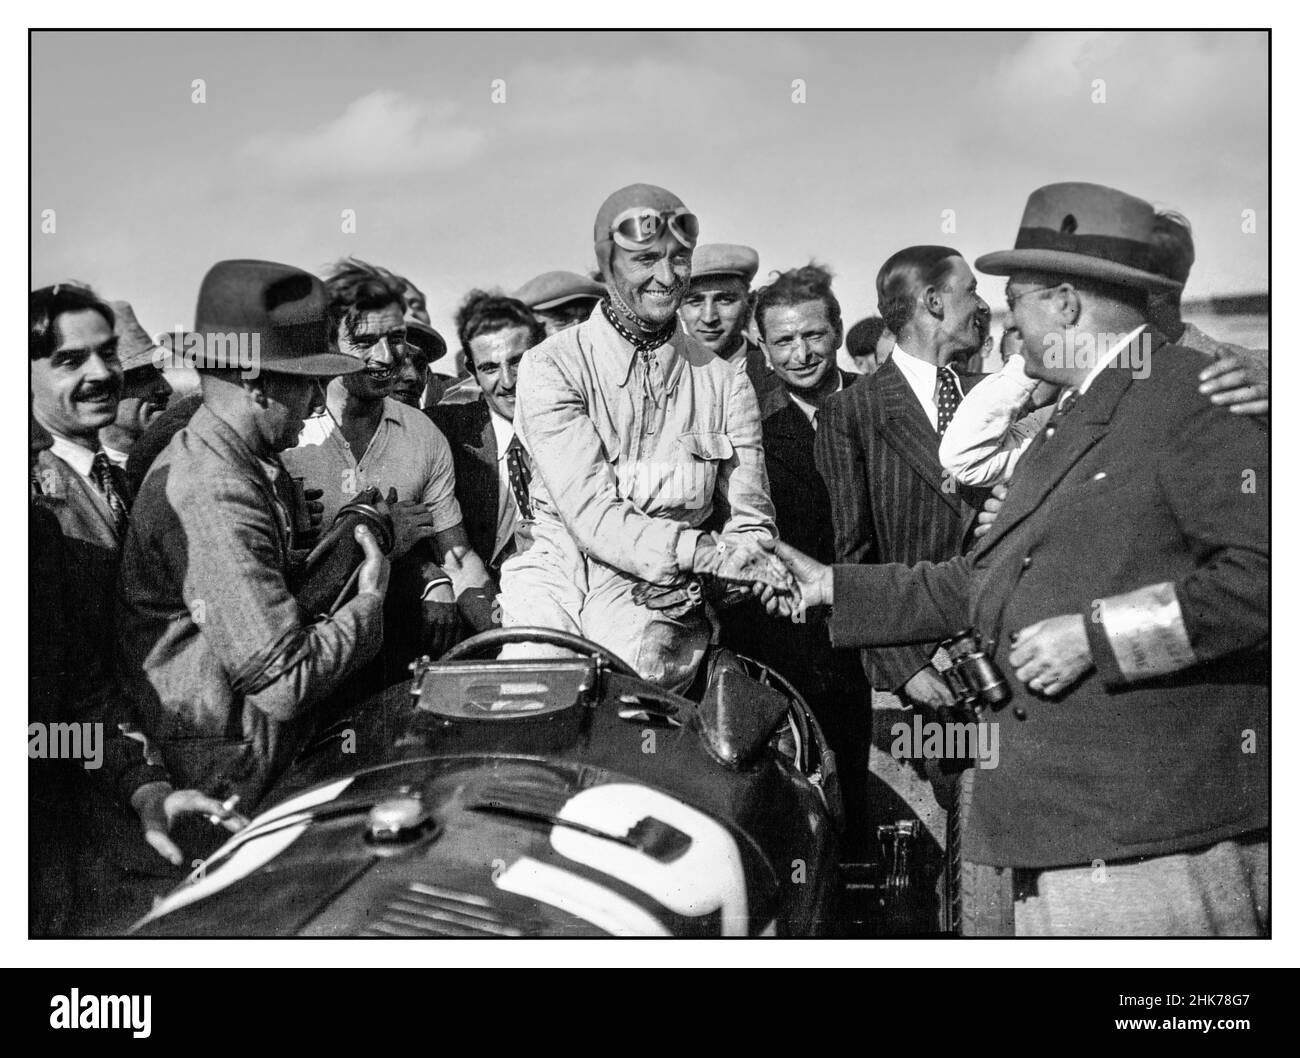 Vintage 1930s Grand Prix France Louis Chiron in an Alfa Romeo being congratulated by the clerk of the circuit after winning the 1934 French Grand Prix 1 July 1934 XXVIII Grand Prix de l'Automobile Club de France Autodrome de Montlhéry Stock Photo